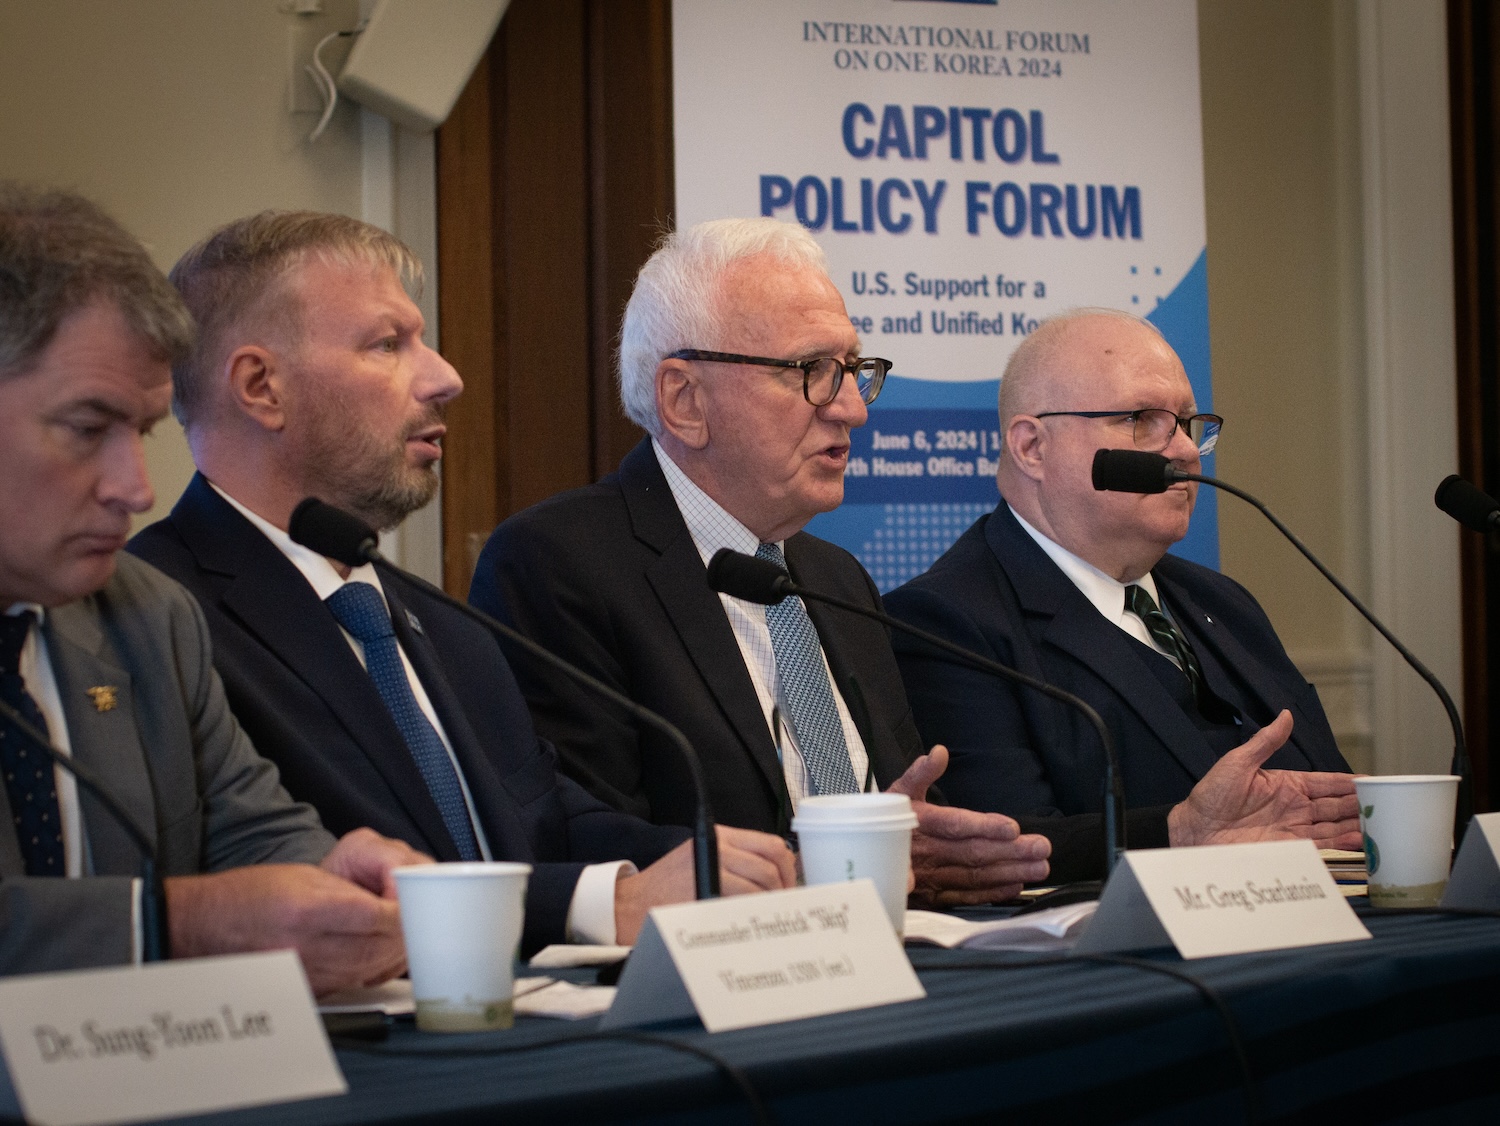 Four men in suits are seated at a table with microphones, papers, and coffee cups. Behind them is a banner for the "Capitol Policy Forum" focusing on U.S. support for a Unified Korea.